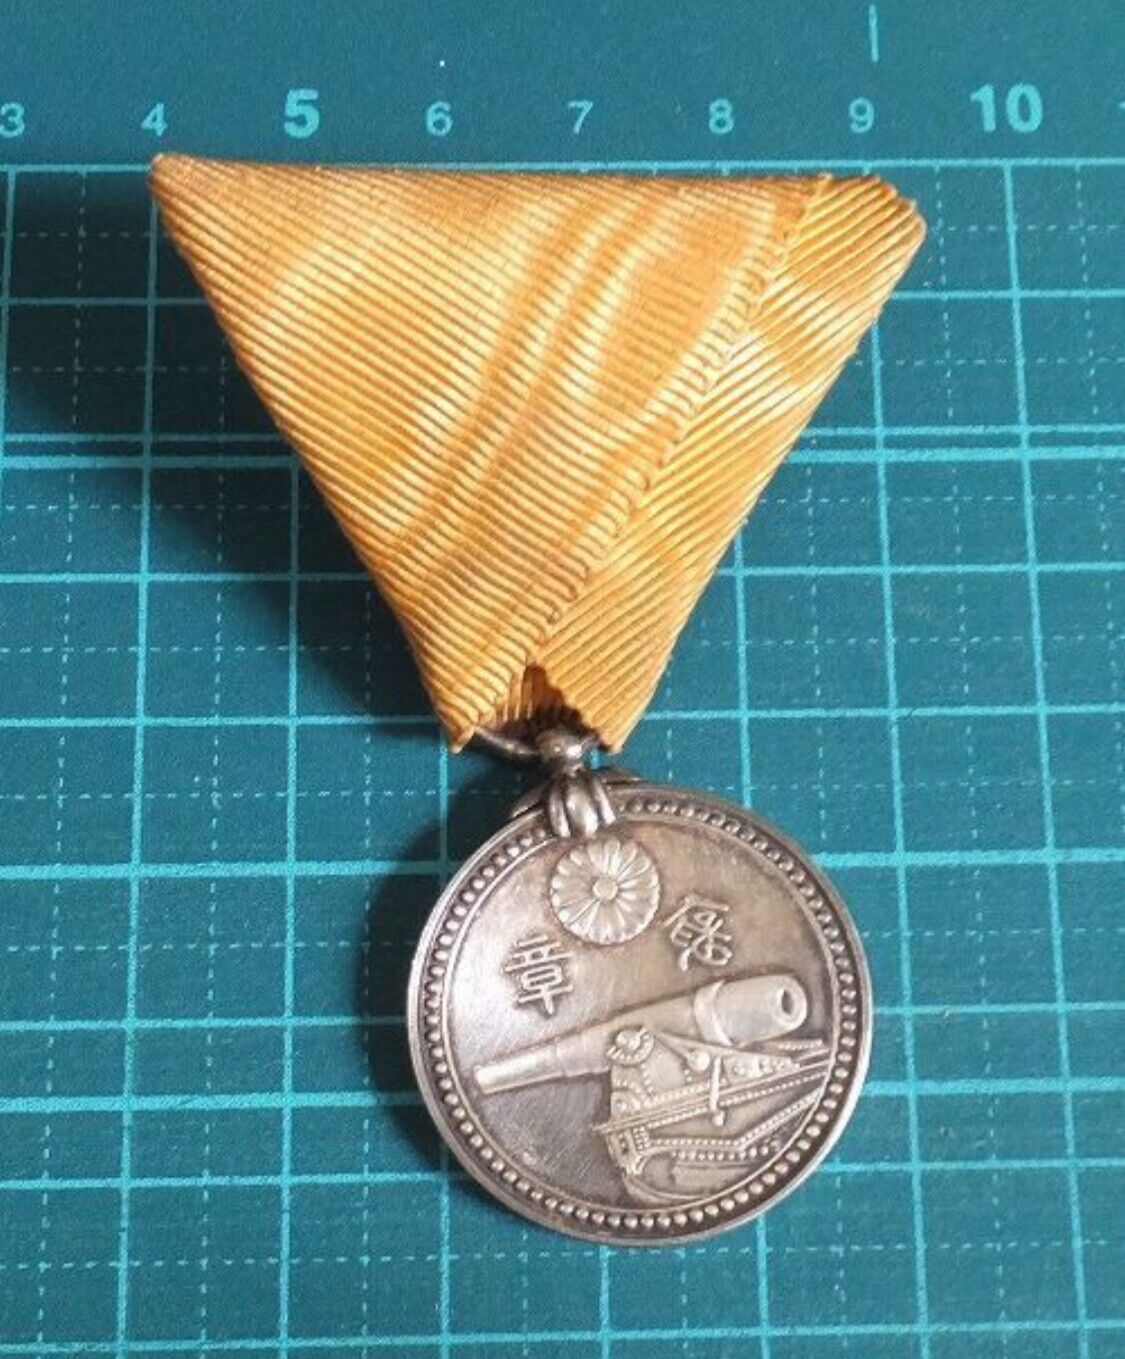 Antique Imperial Japanese Merit Medal of the Yellow Ribbon, 1887-1894, Silver